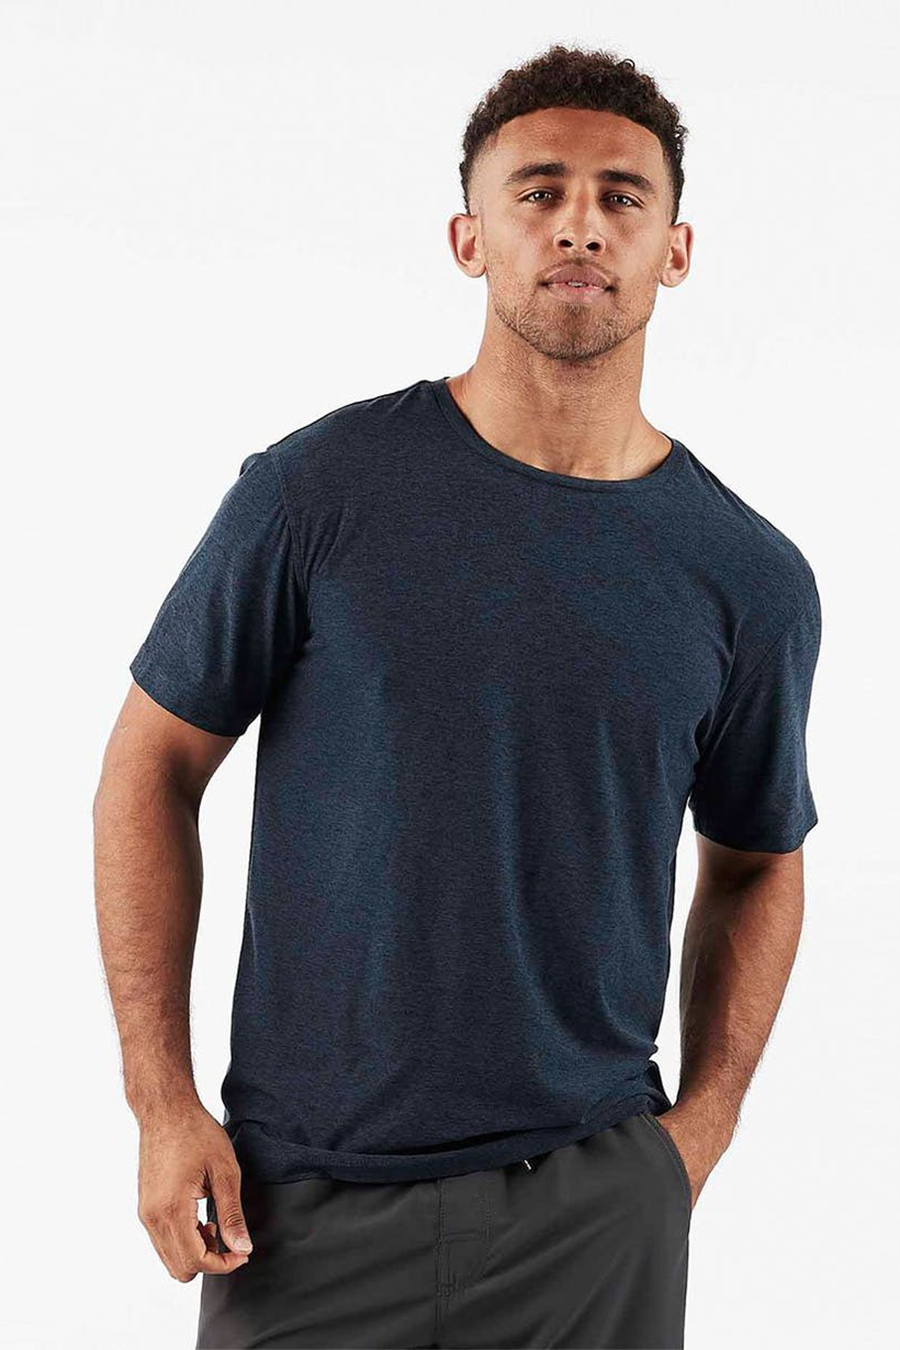 Strato Tech Tee | Navy Heather - Main Image Number 1 of 1